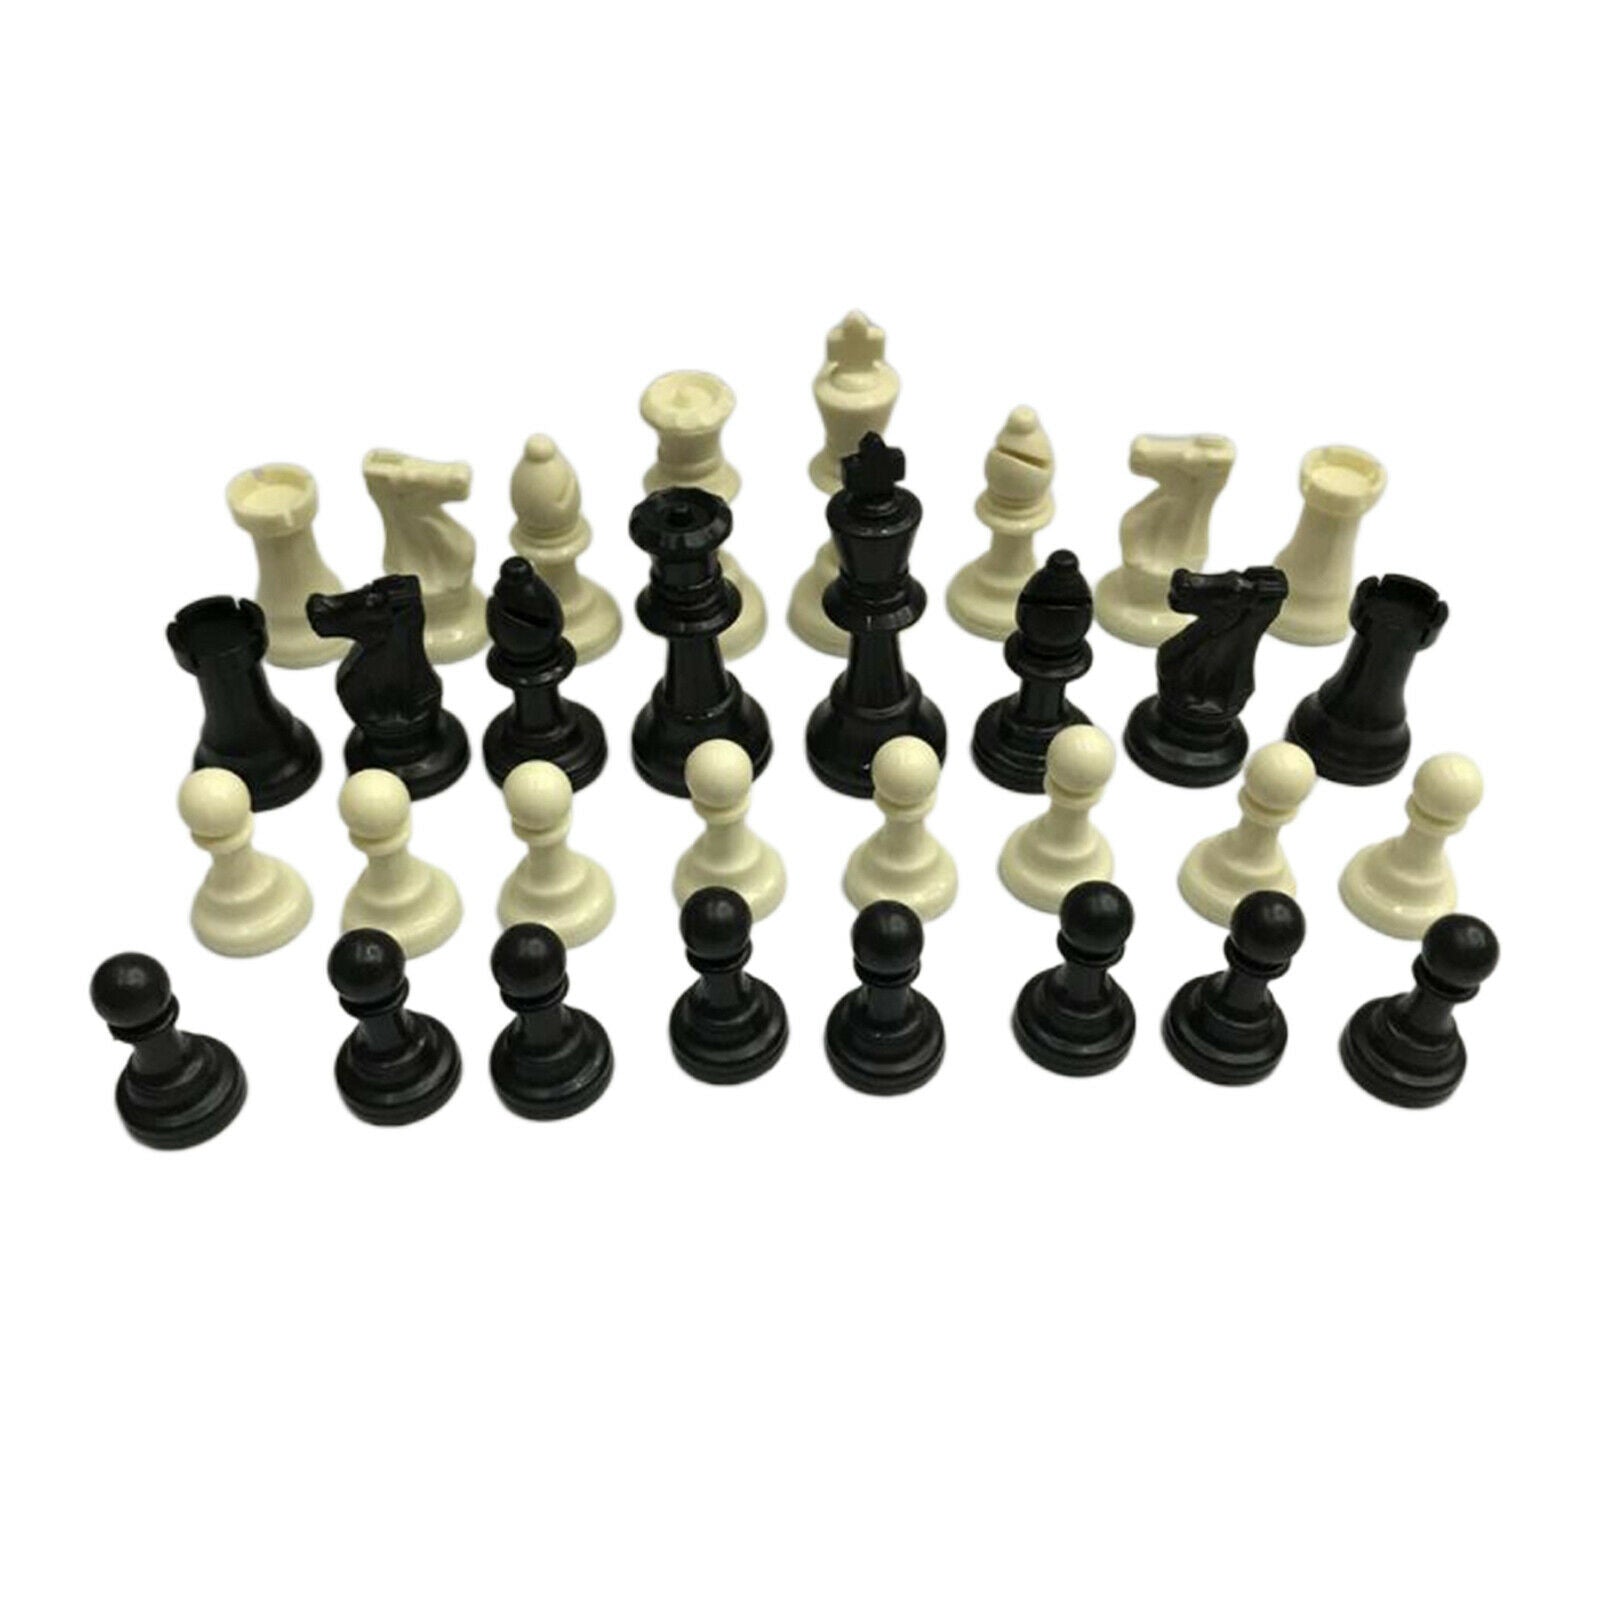 Standard Chess Pieces Set Chess Set Chess Game 75mm King Gift Easy to Carry